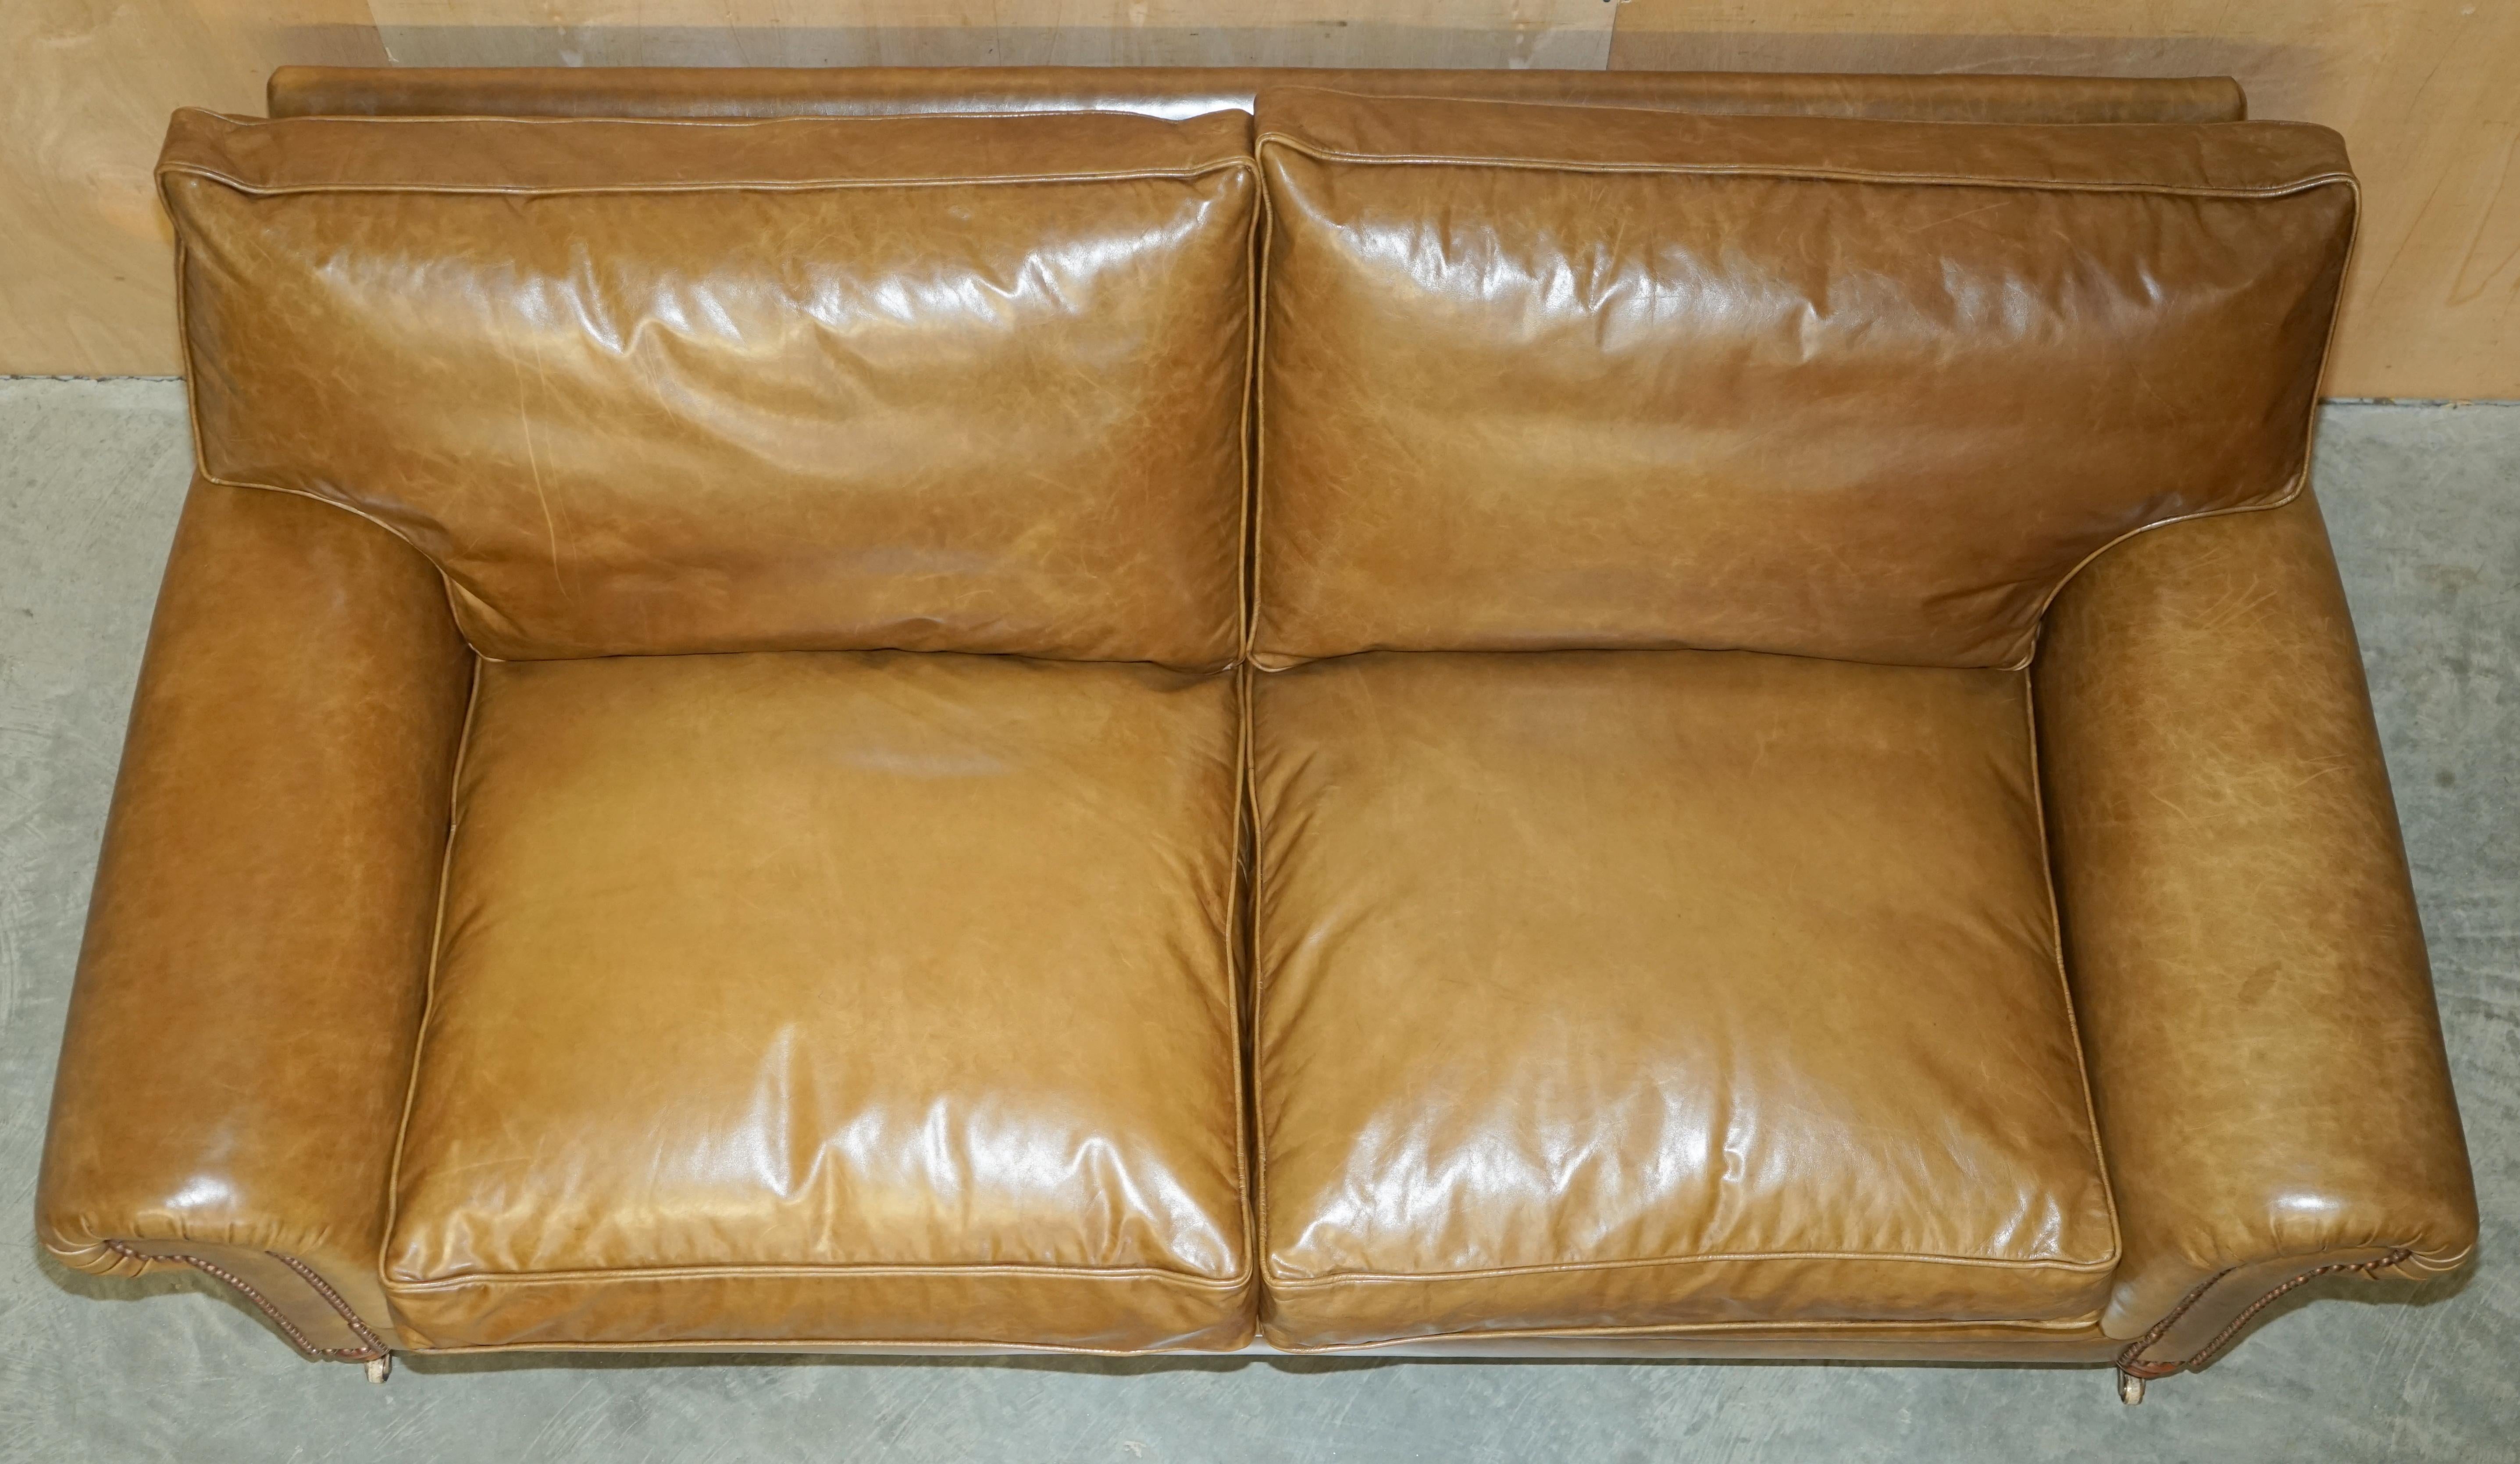 LOVELY GEORGE SMITH SCROLL CUSHiON BACK BROWN LEATHER SOFA en vente 7